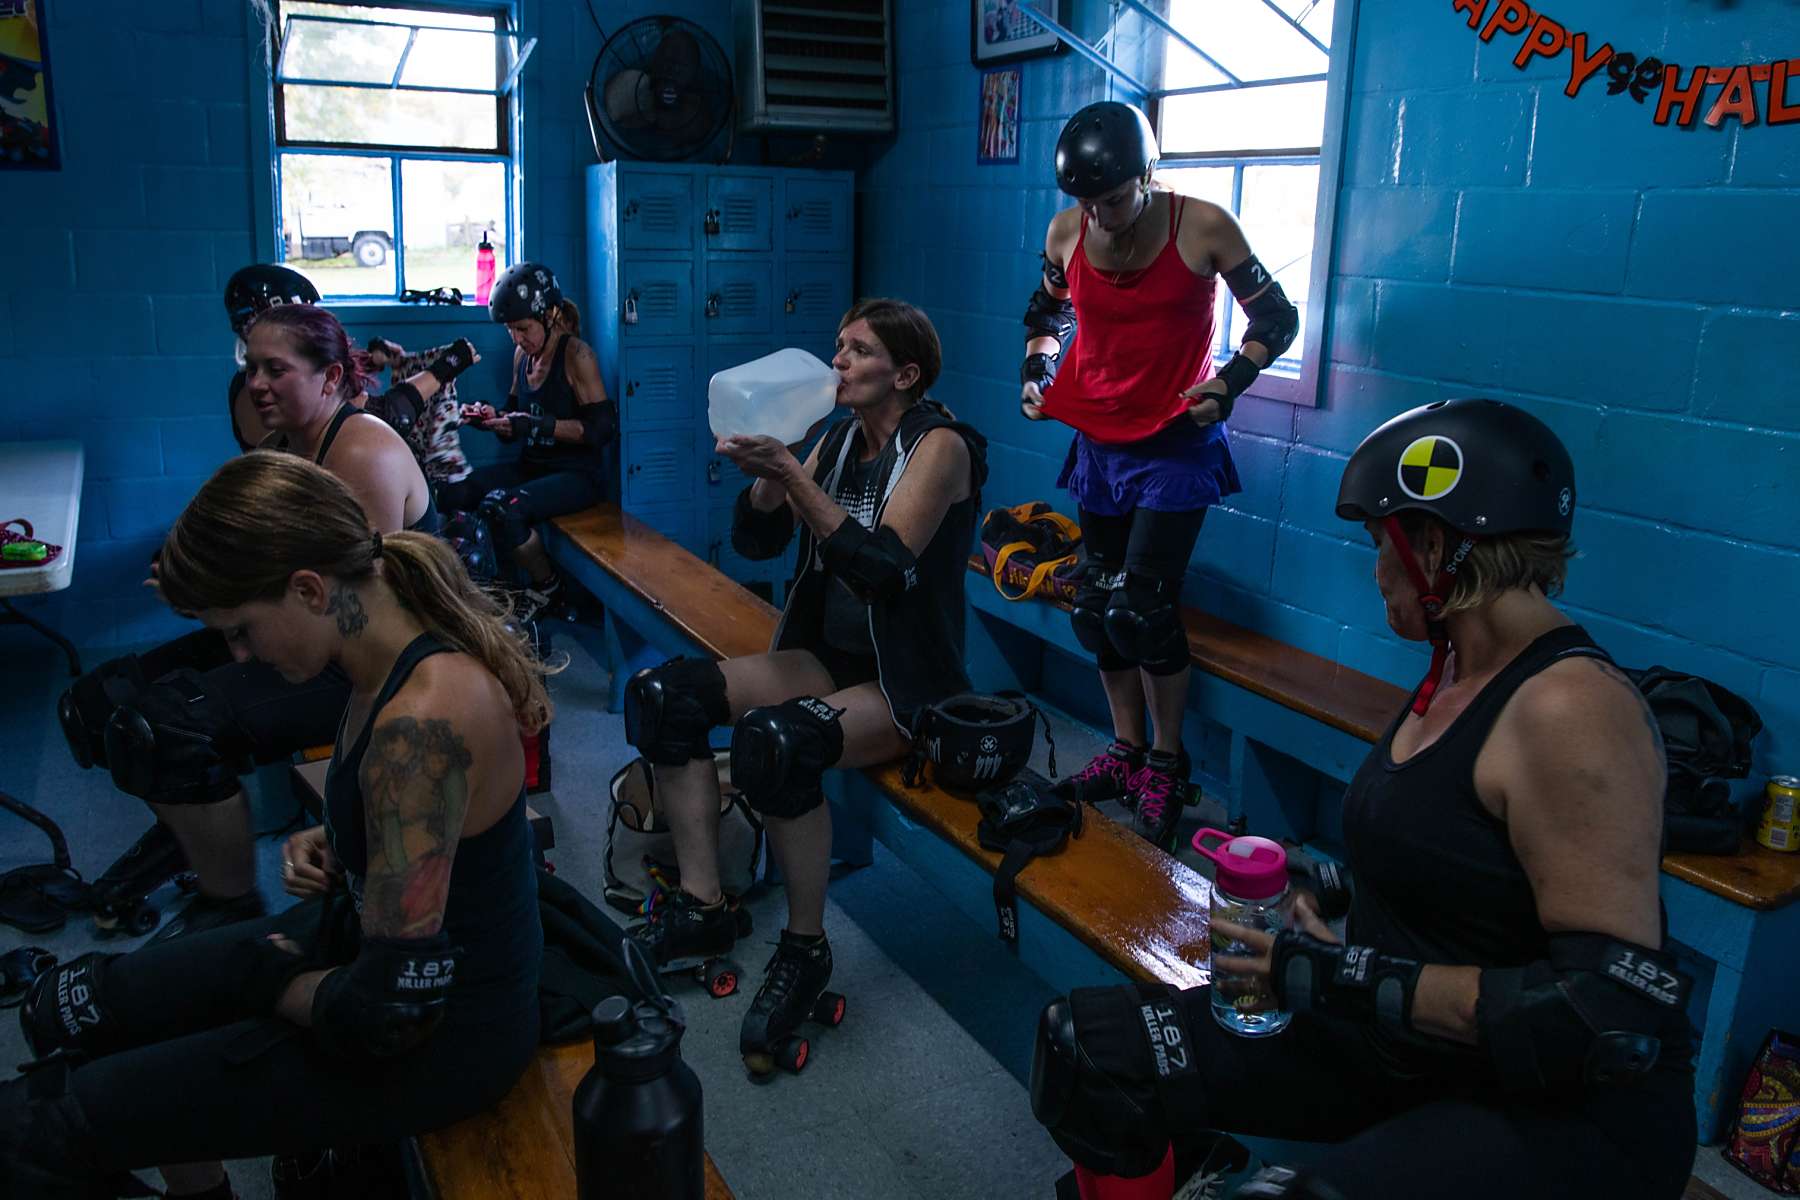 A team of women prepare for a roller derby event